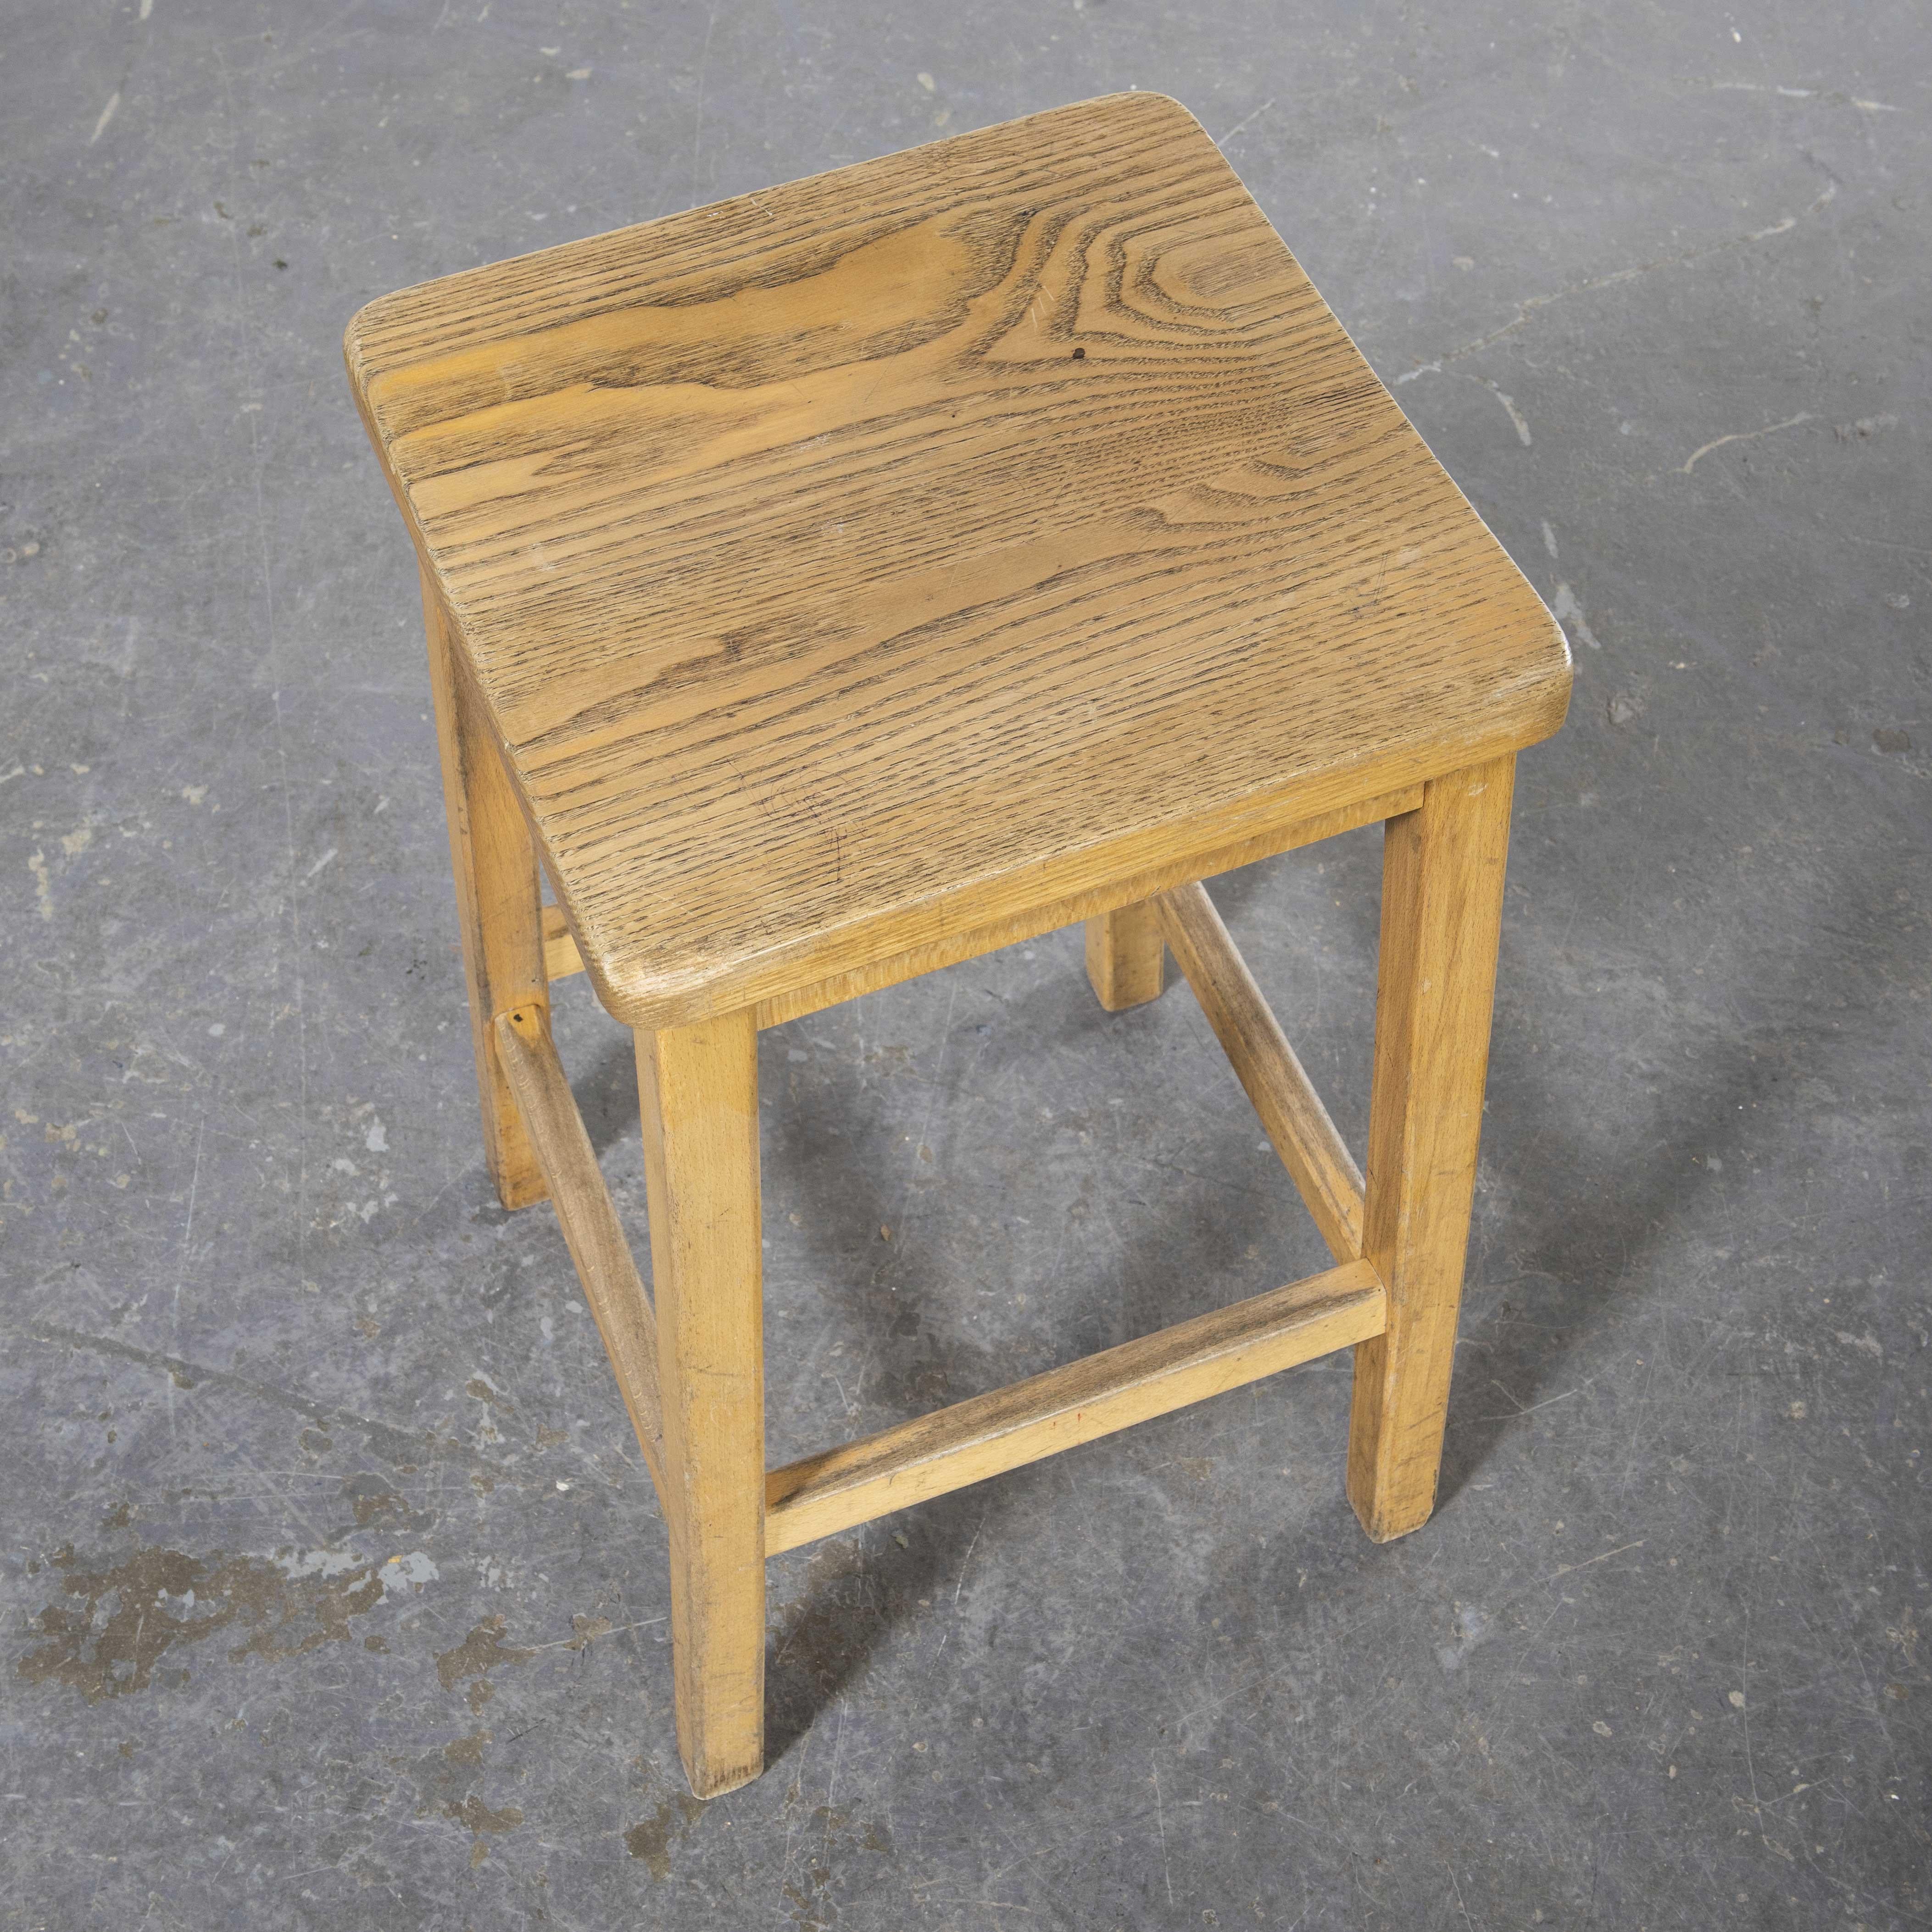 1950's English Oak School Laboratory High Stools, Large Quantities Available 1